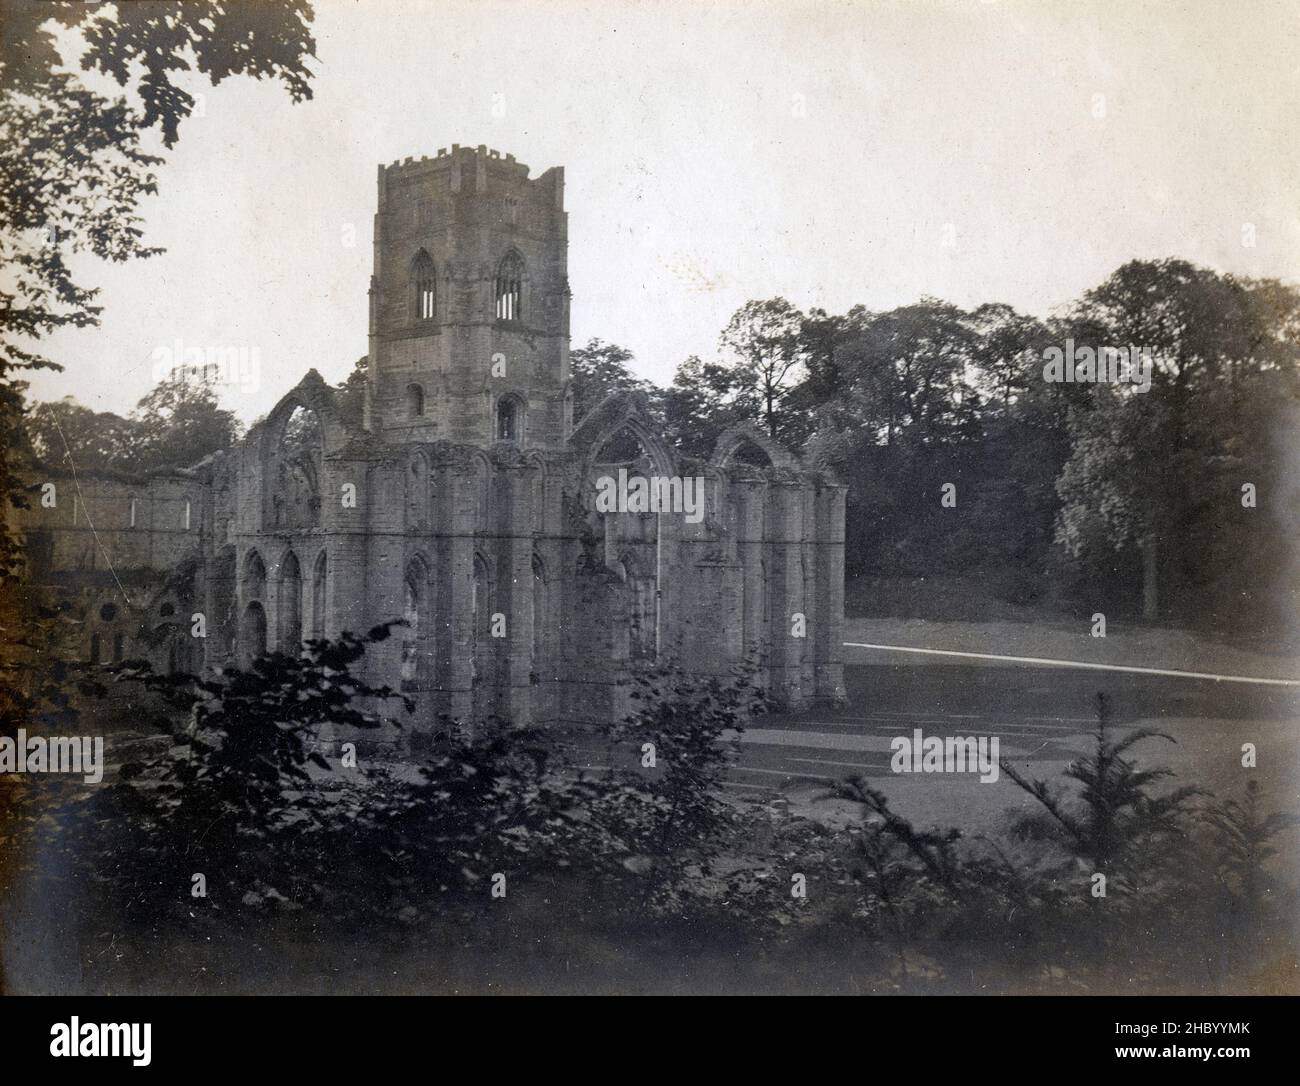 Antique c1900 photograph, Fountains Abbey. Fountains Abbey is one of the largest and best preserved ruined Cistercian monasteries in England. SOURCE: ORIGINAL PHOTOGRAPH Stock Photo